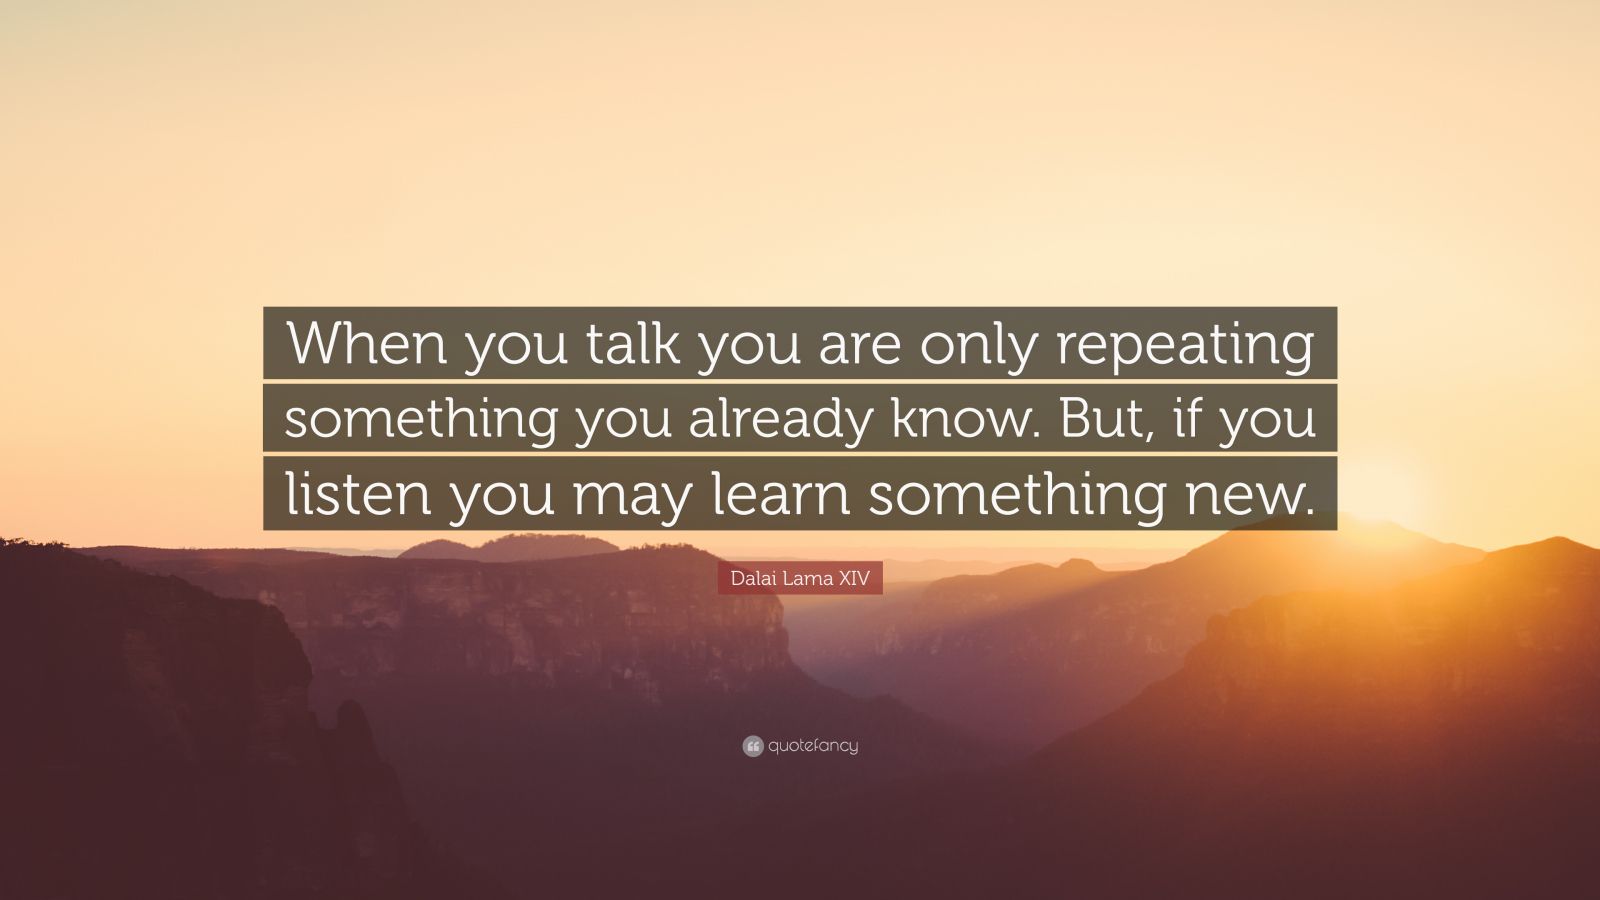 Dalai Lama XIV Quote: “When you talk you are only repeating something ...